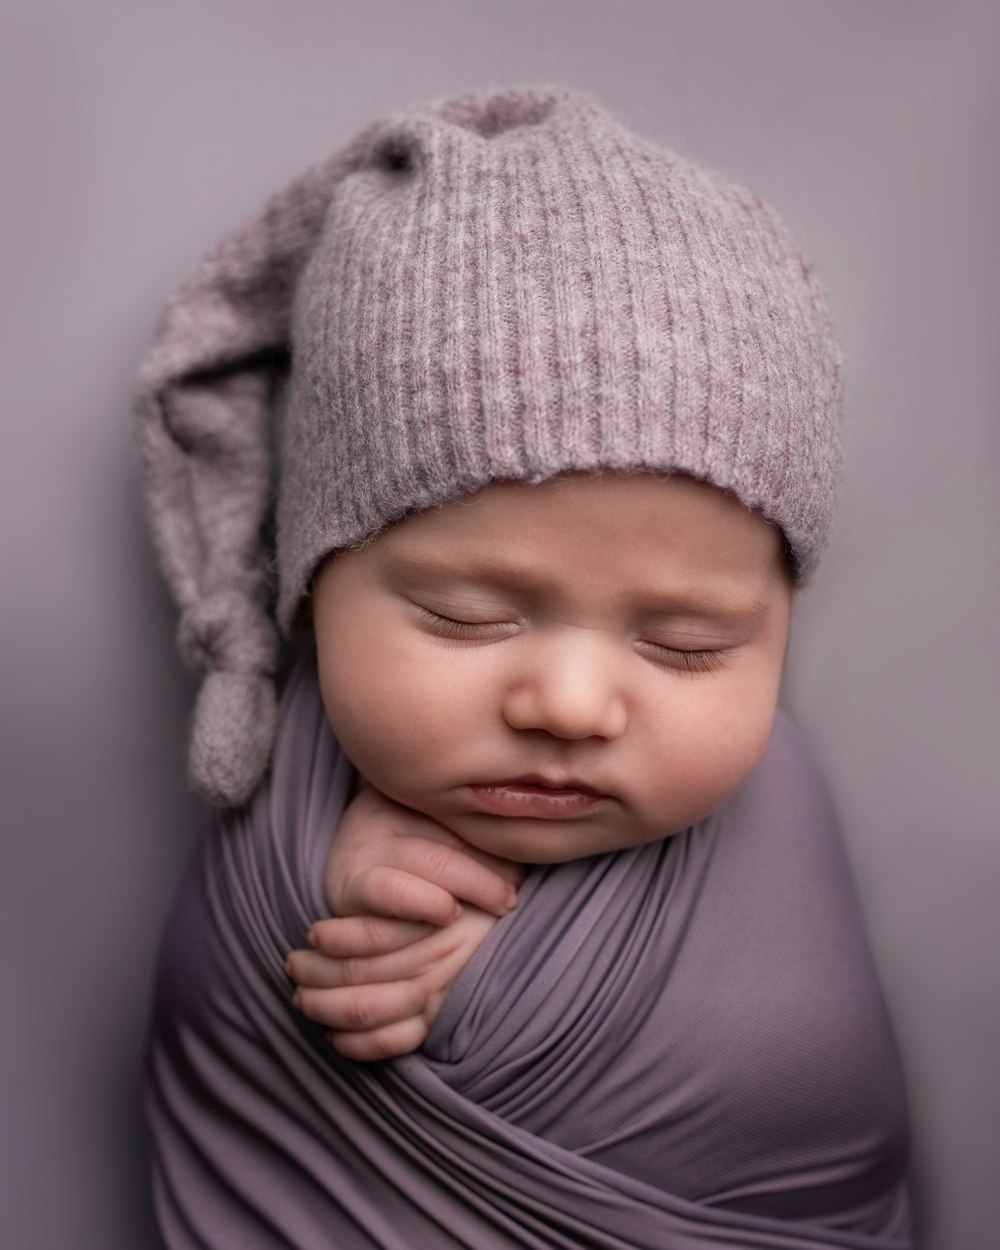 500+ Newborn Baby Pictures [HD]  Download Free Images on Unsplash